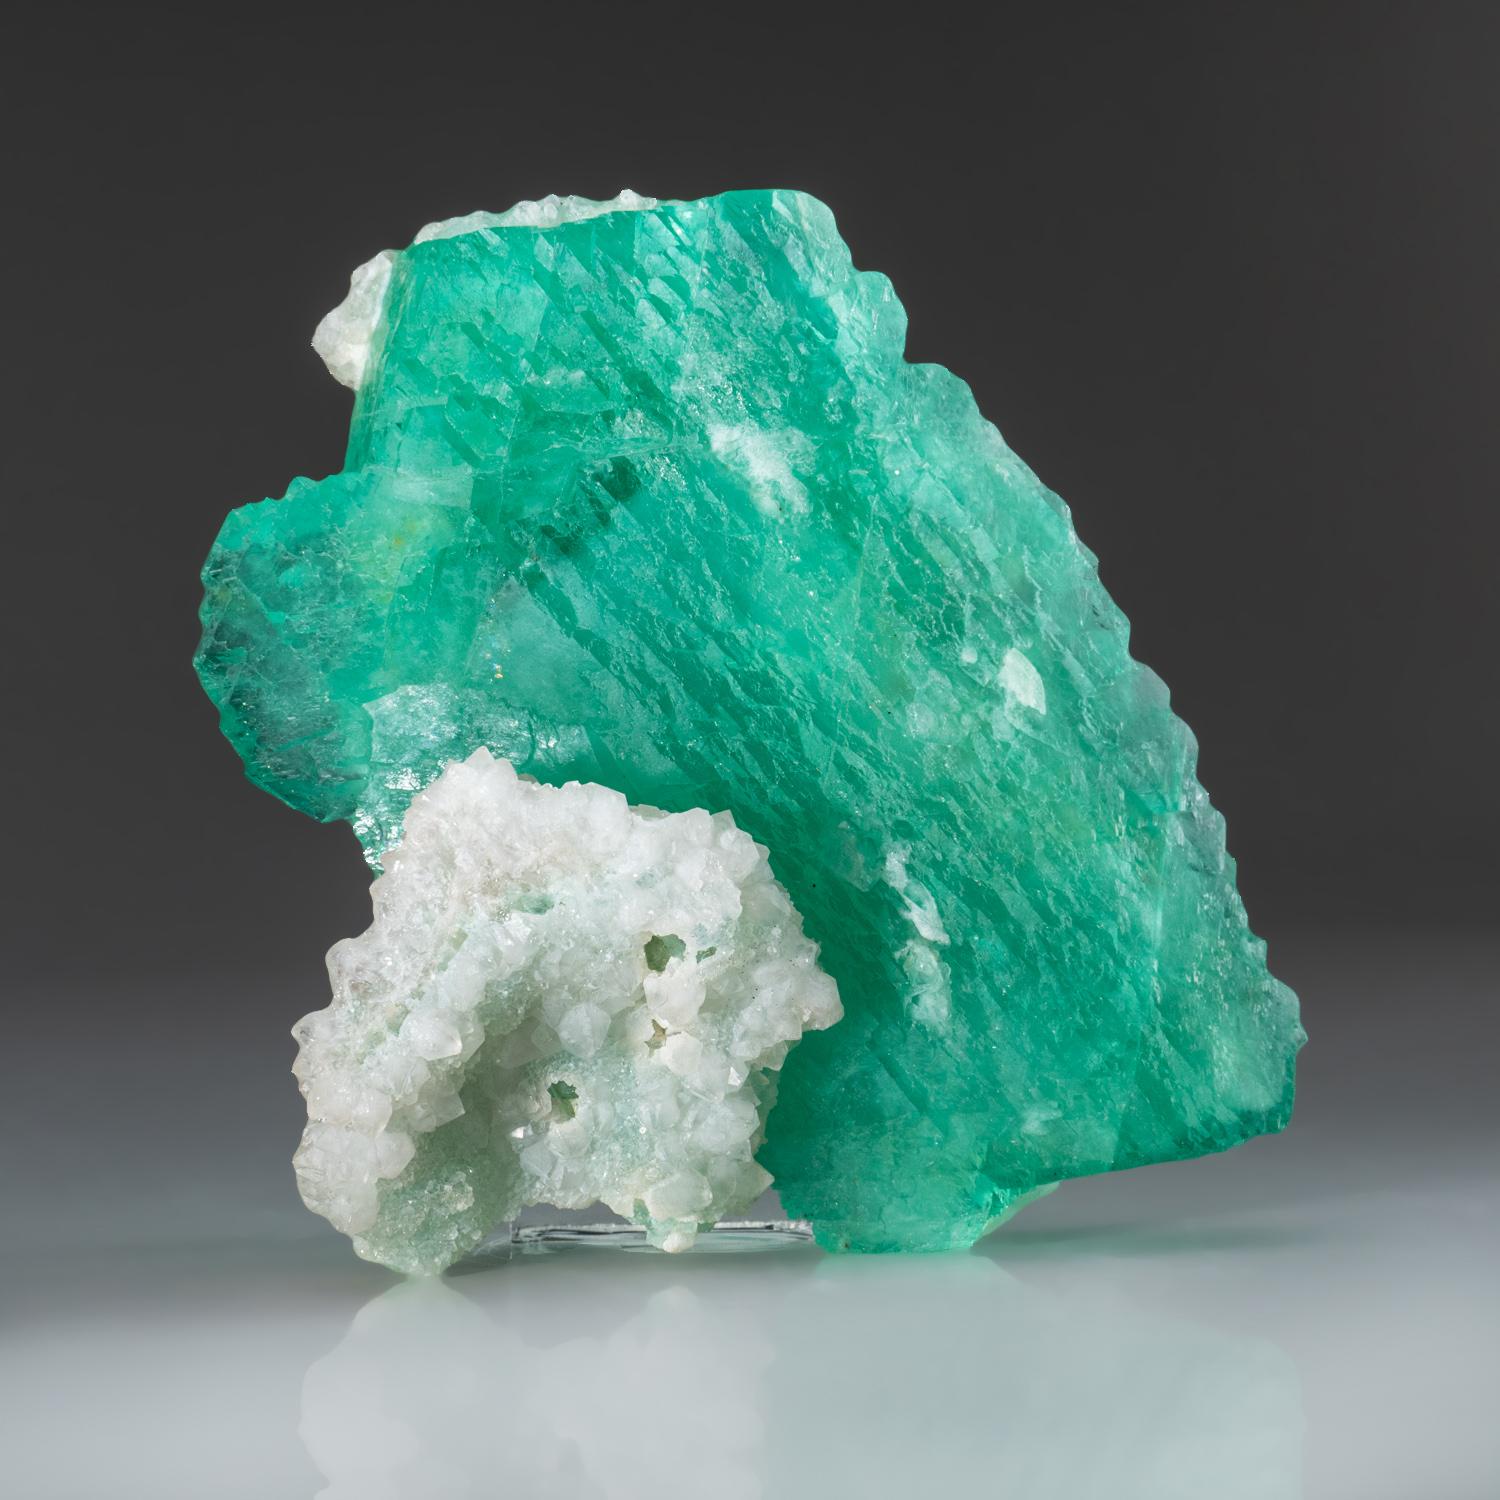 Crystal Green Fluorite with QUartz from Yaogangxian Mine, Nanling Mountains, Hunan Provi For Sale